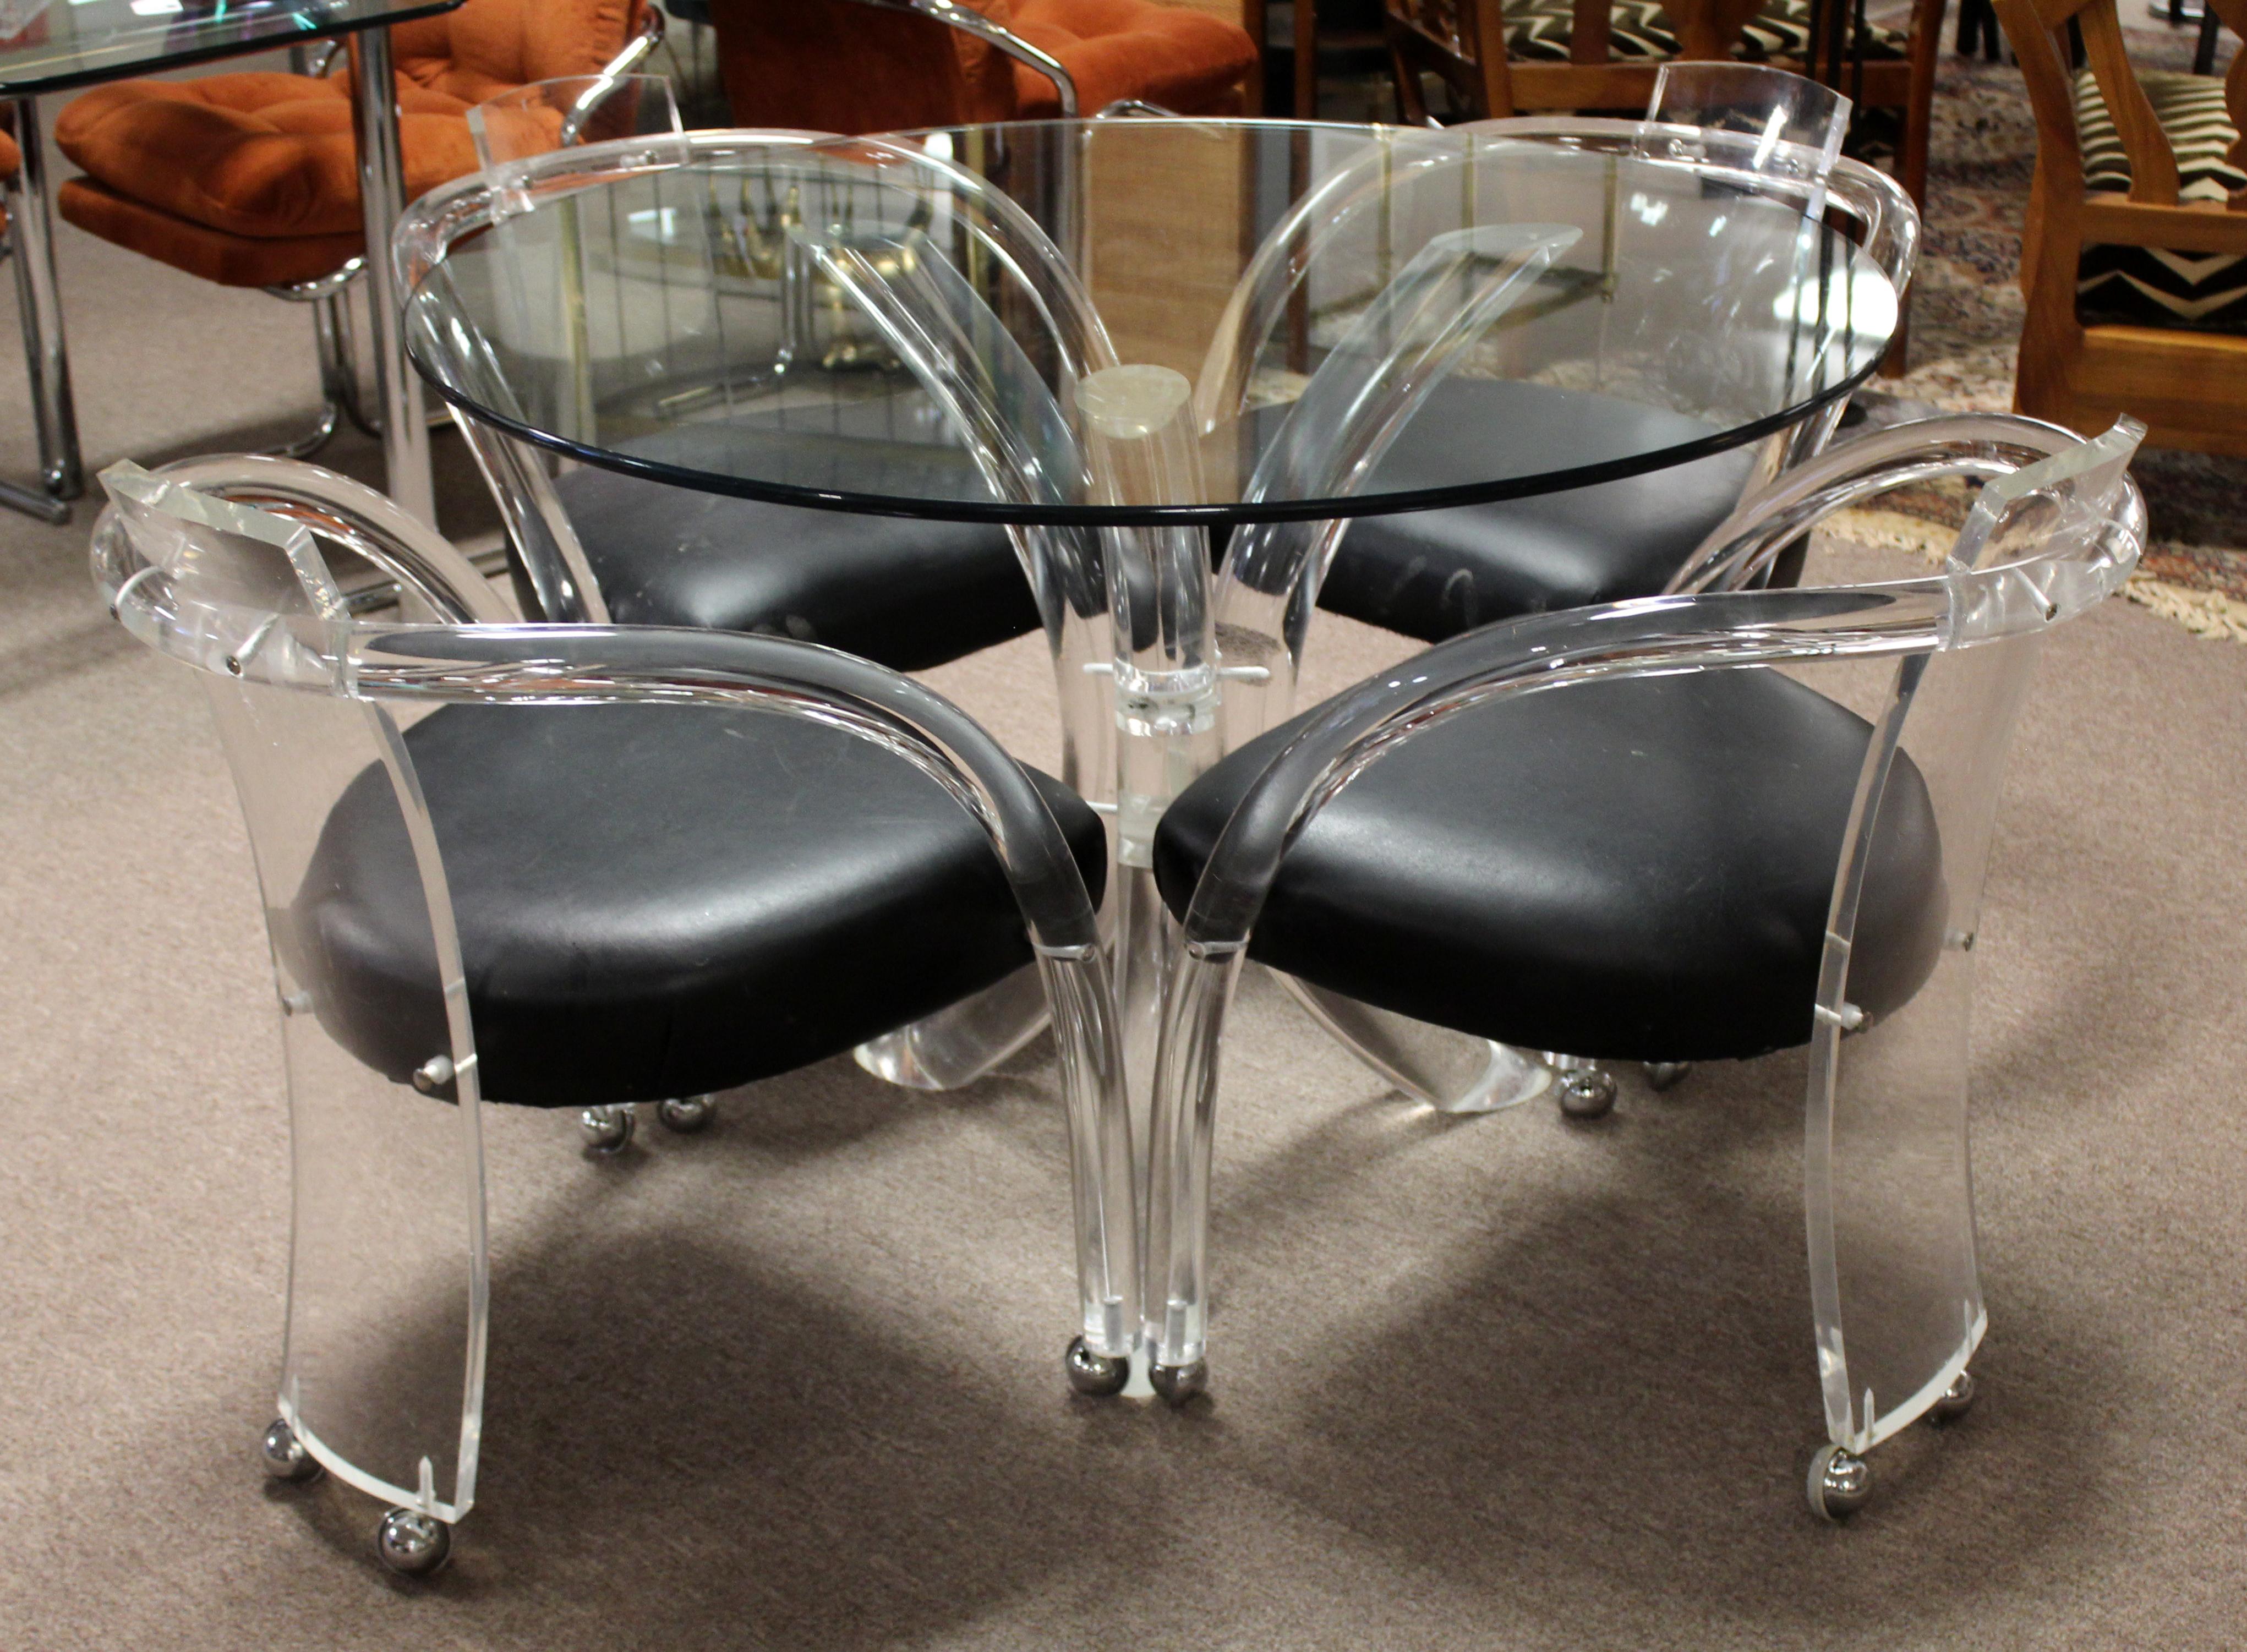 For your consideration is a luxurious looking dinette set, including four Lucite and vinyl armchairs, and a round table, made of Lucite and glass, by Charles Hollis Jones, circa 1970s. In vintage condition. The dimensions of the table are 42